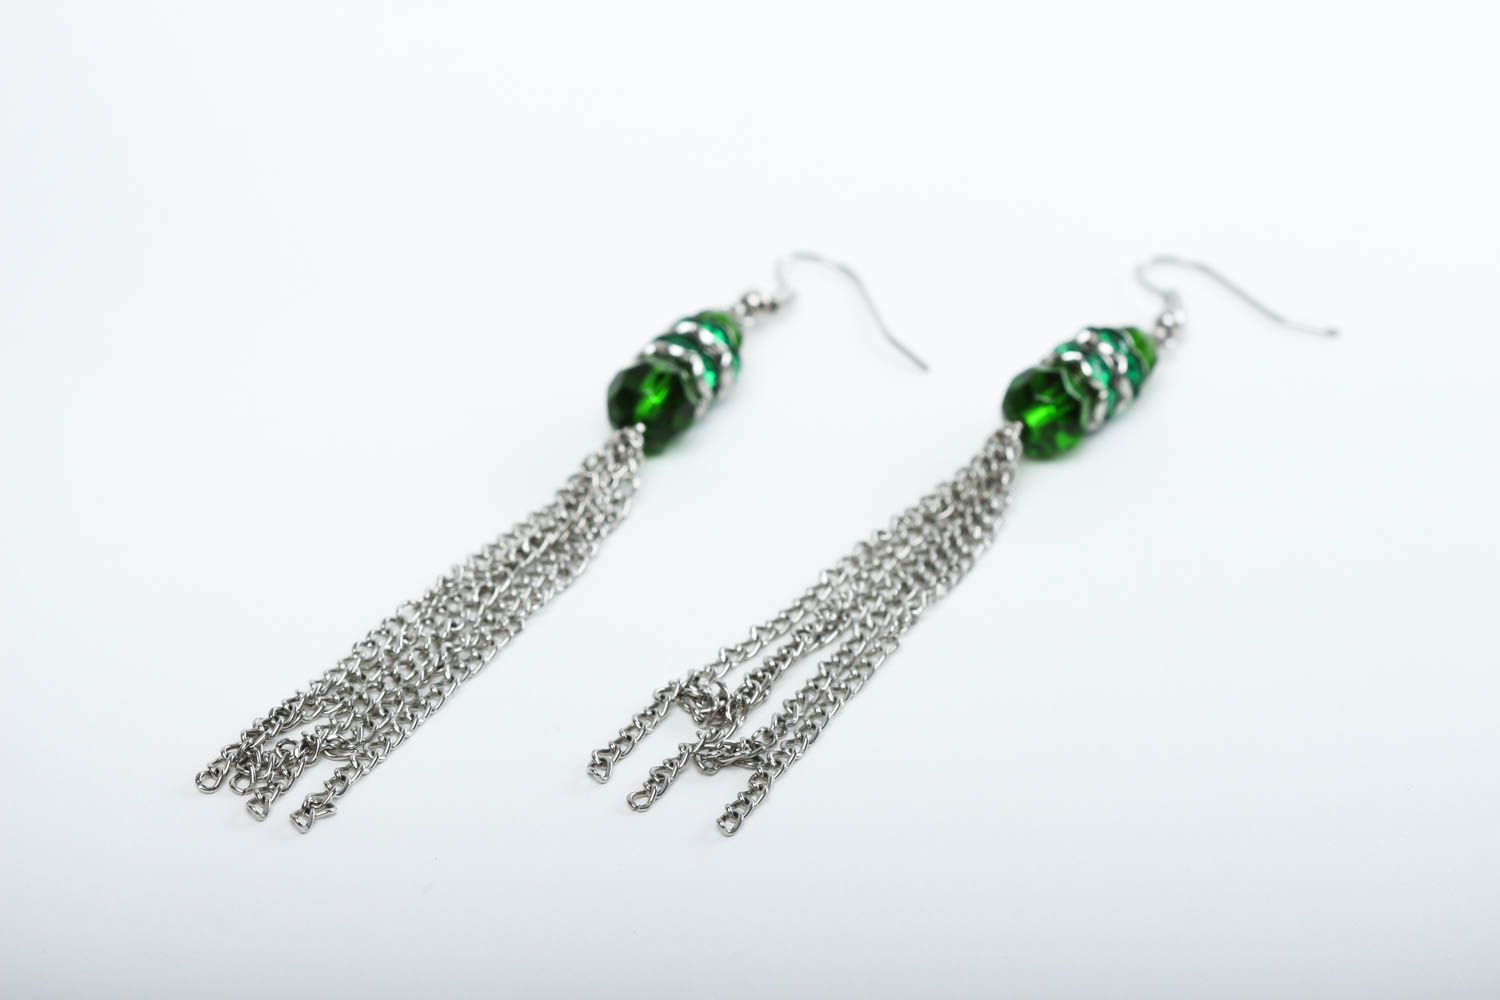 Handmade earrings crystal jewelry fashion accessories best gifts for women photo 3